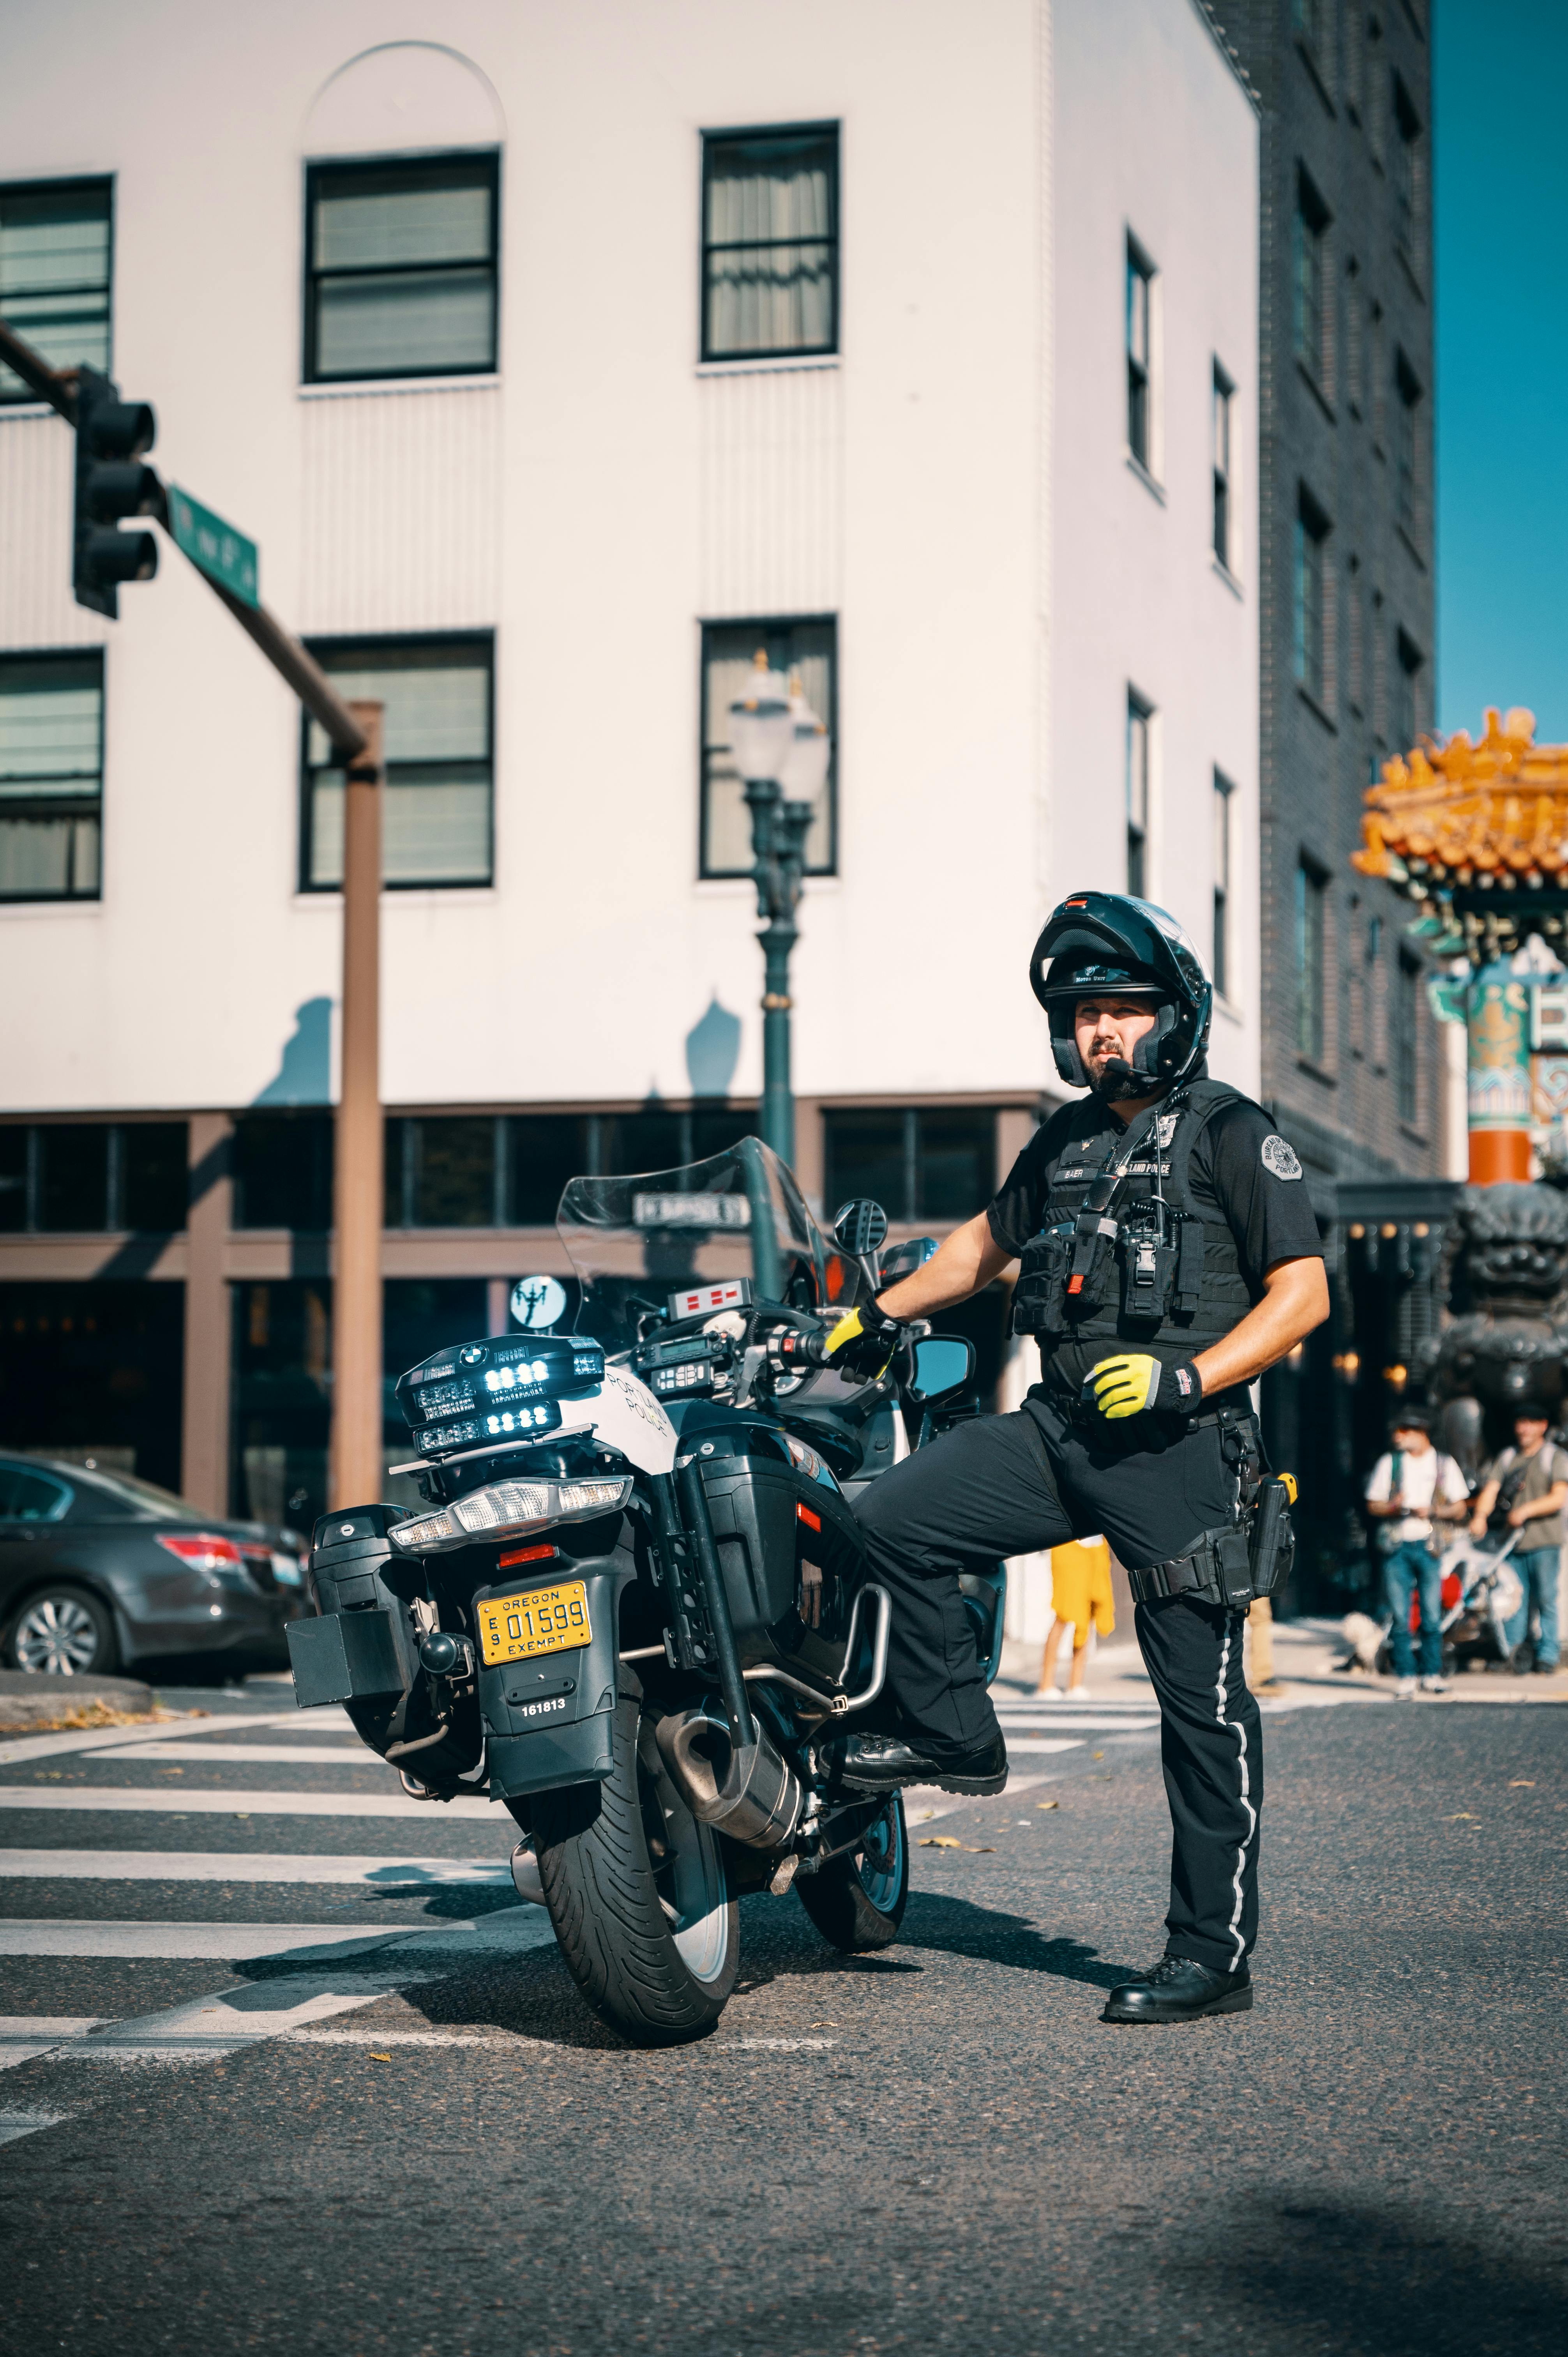 Policeman in a Uniform Standing by His Motorcycle